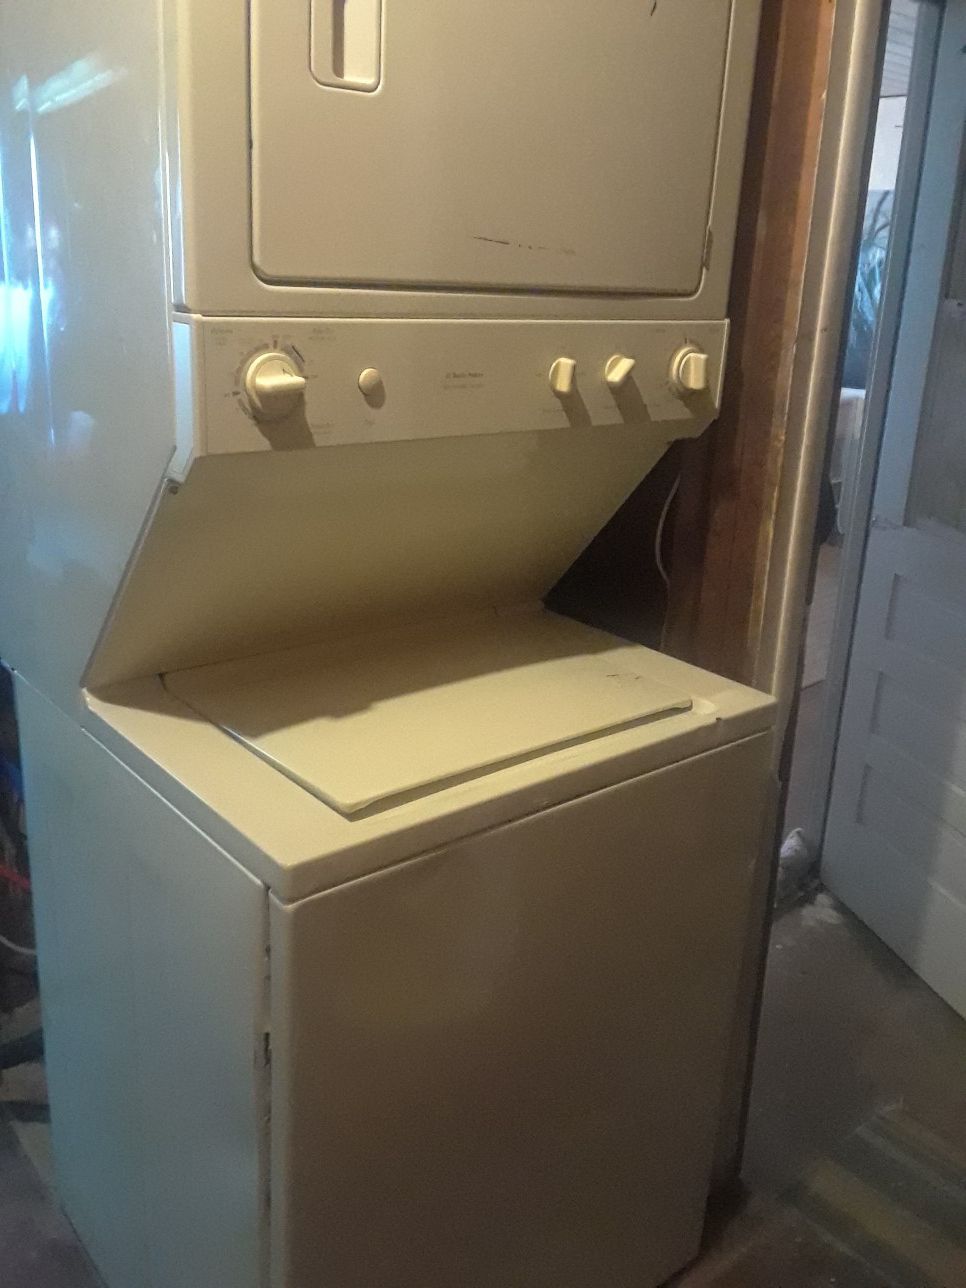 GE stackable washer and dryer